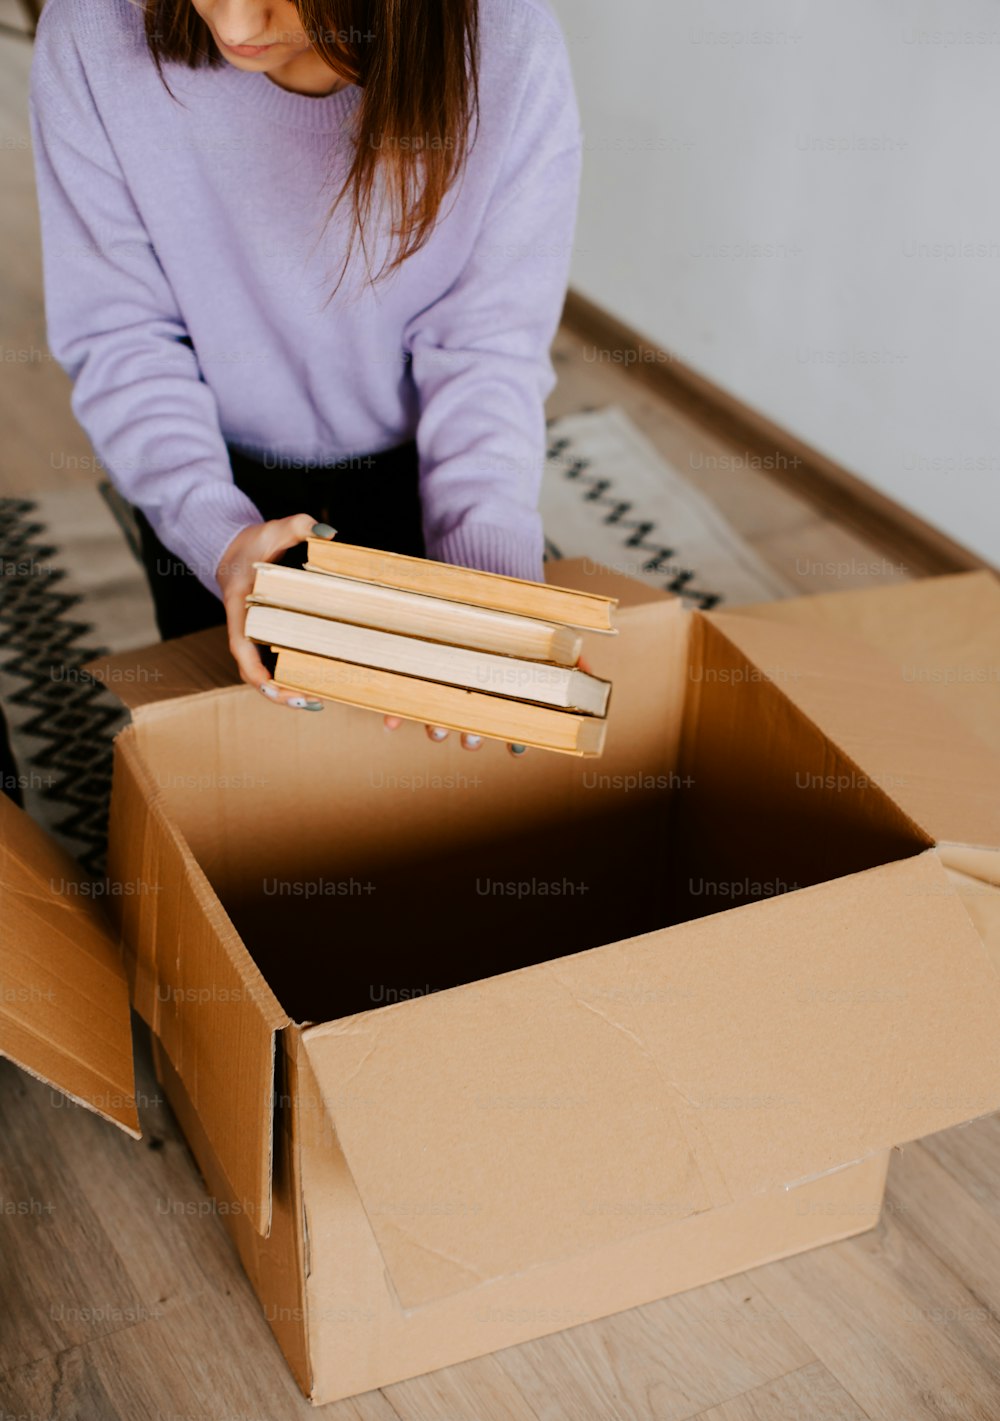 a girl is opening a box on the floor